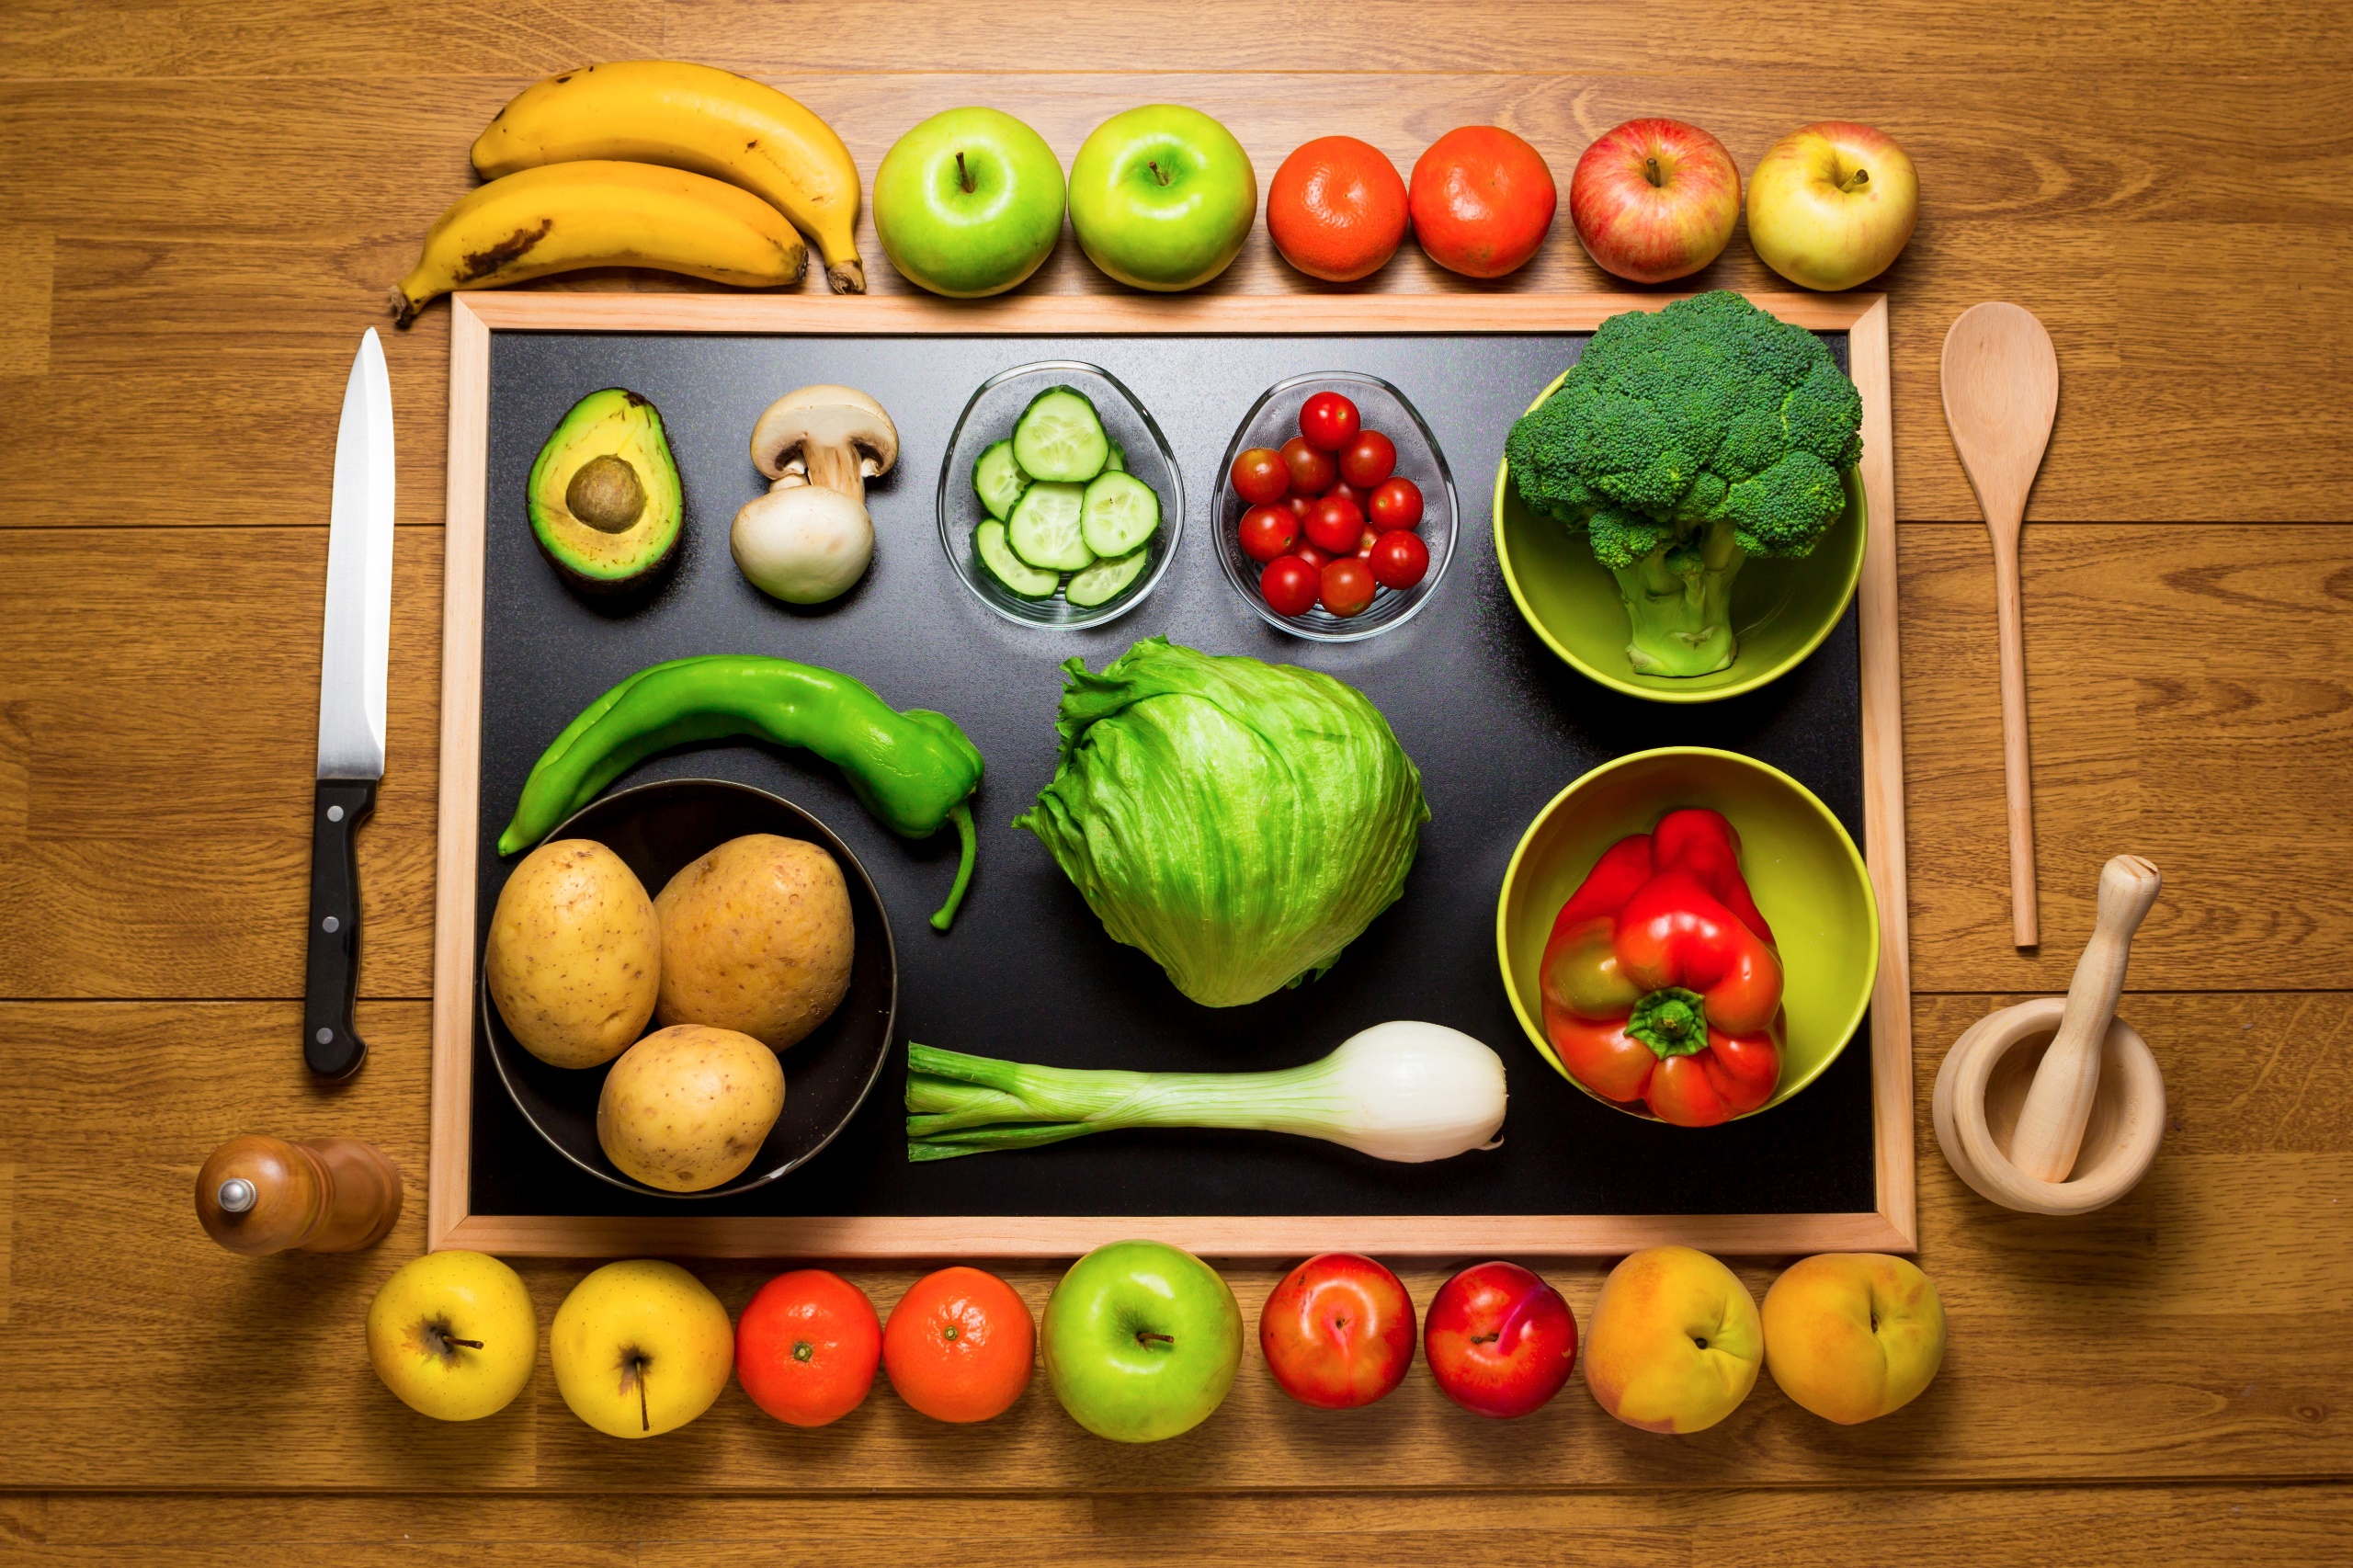 Fruits & Vegetables Wallpapers